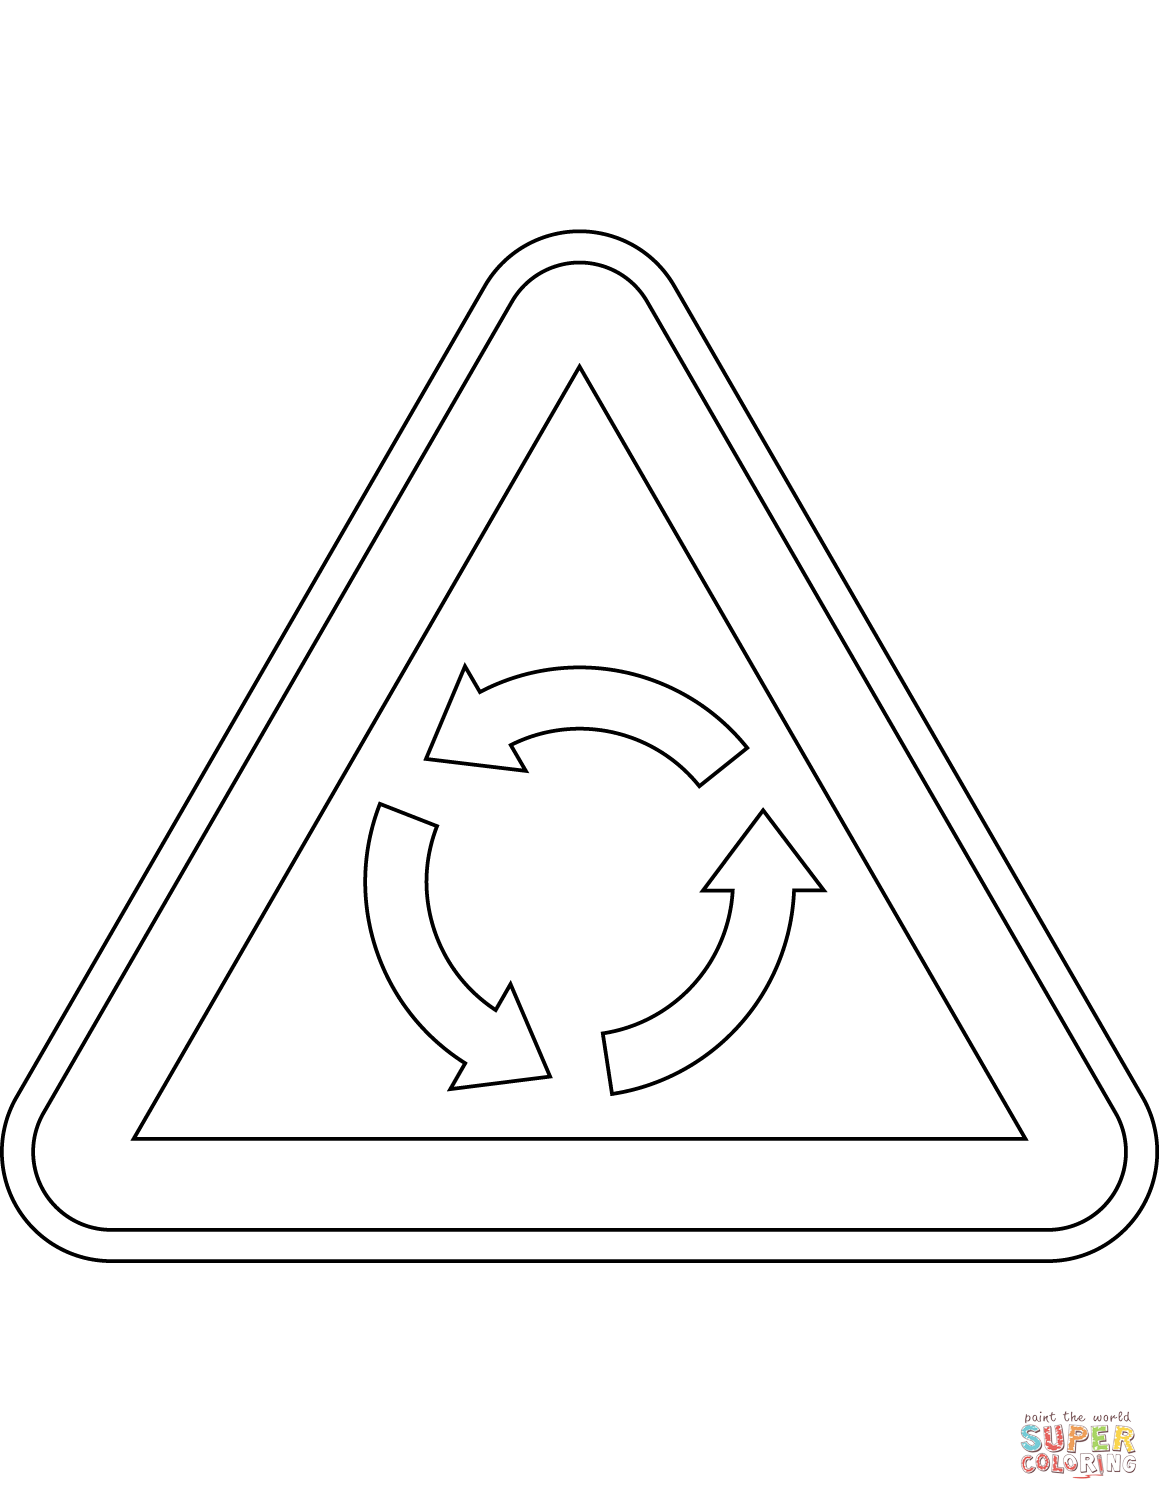 Roundabout ahead sign in portugal coloring page free printable coloring pages